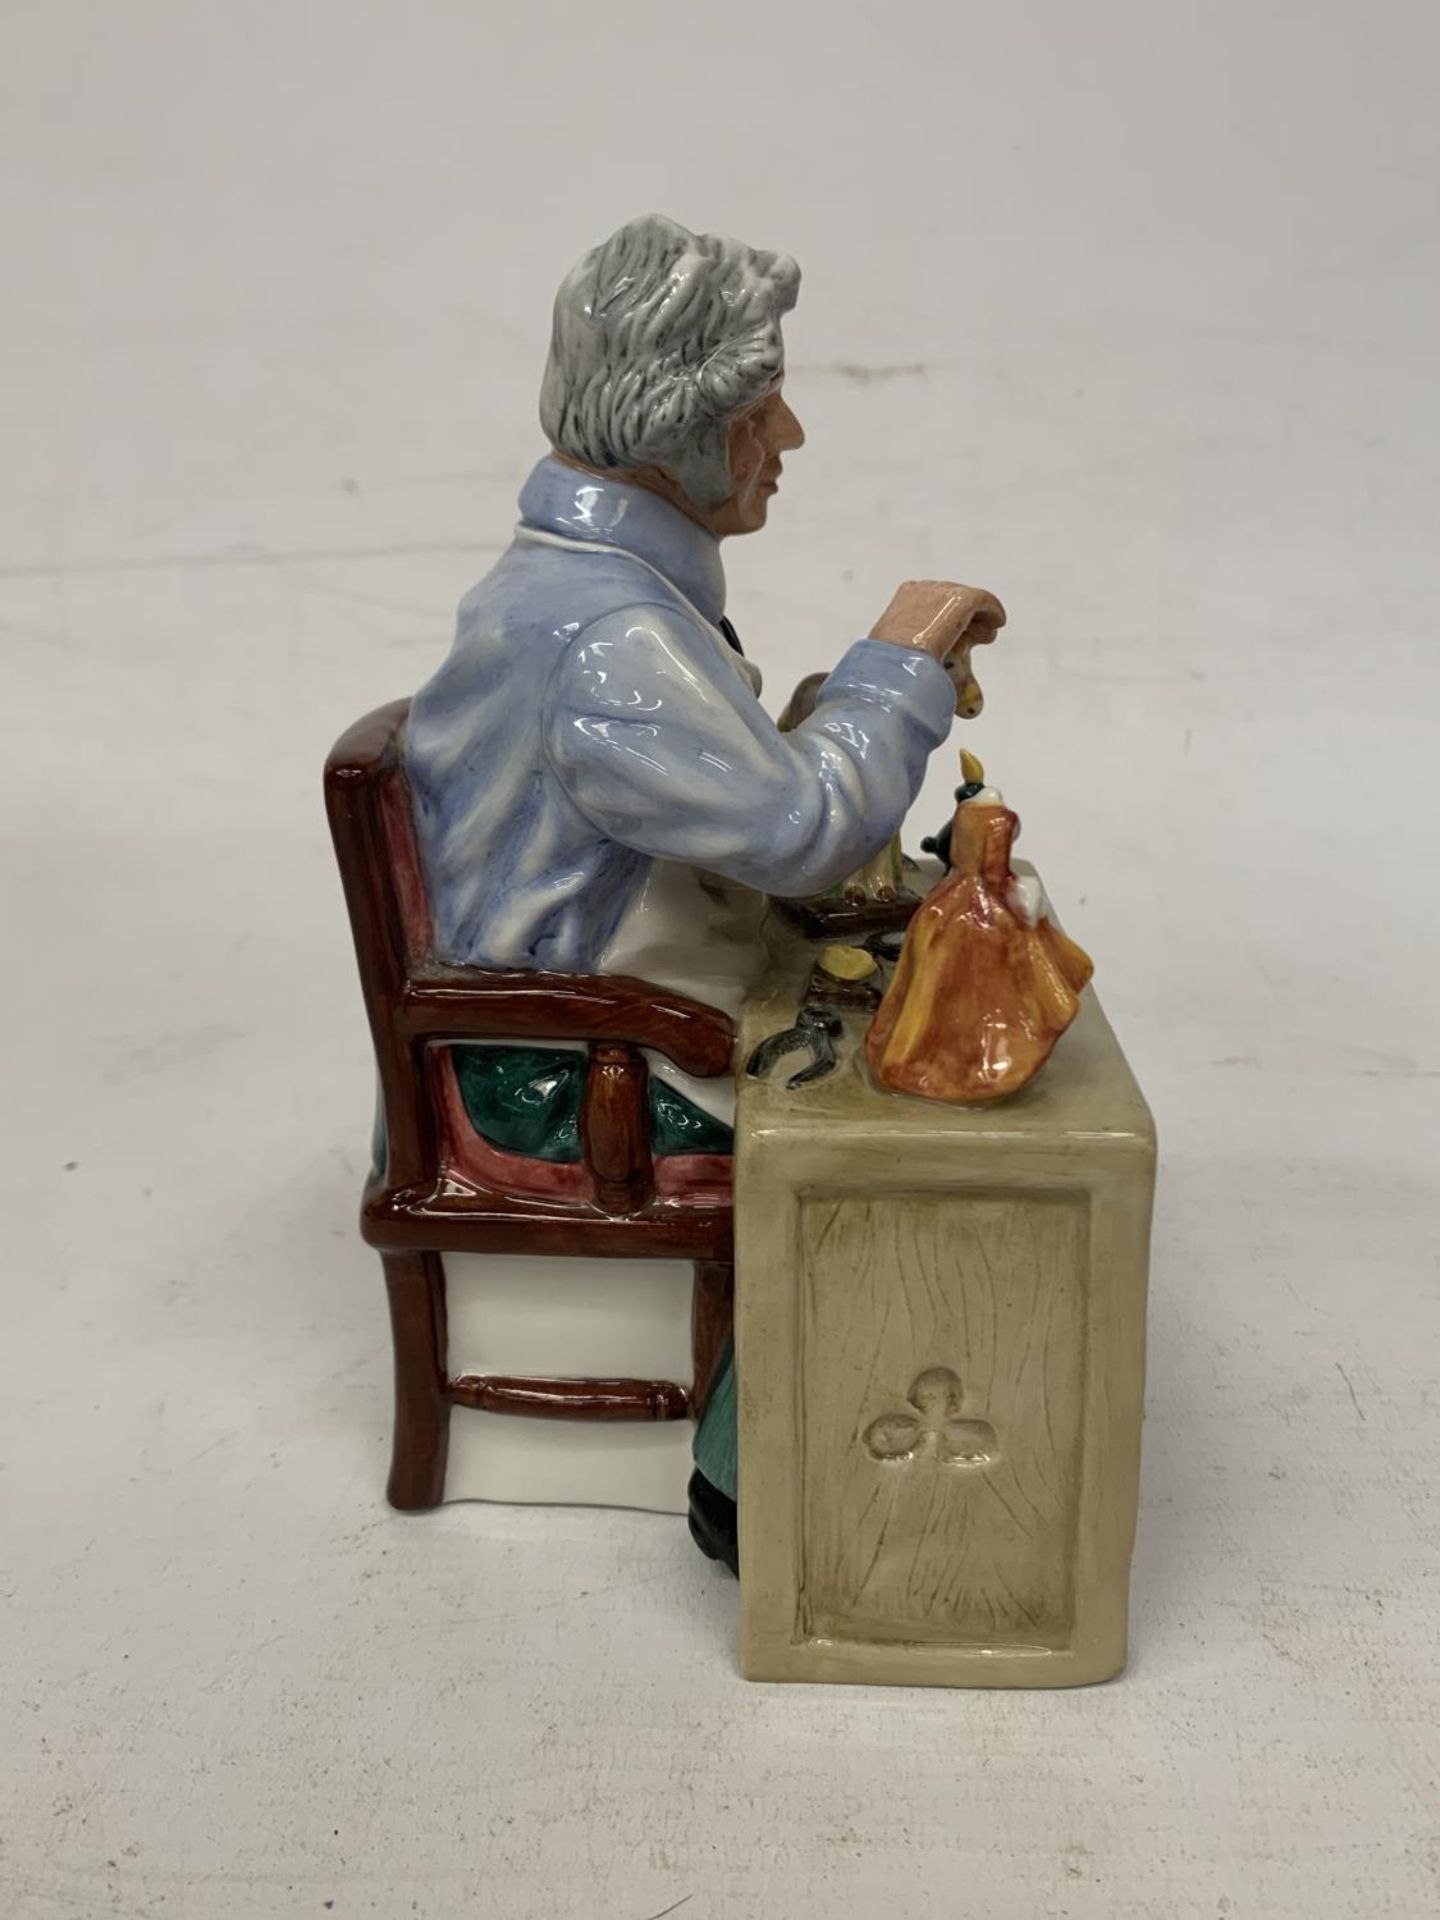 A ROYAL DOULTON FIGURE "THE CHINA REPAIRER" HN 2943 - Image 2 of 5